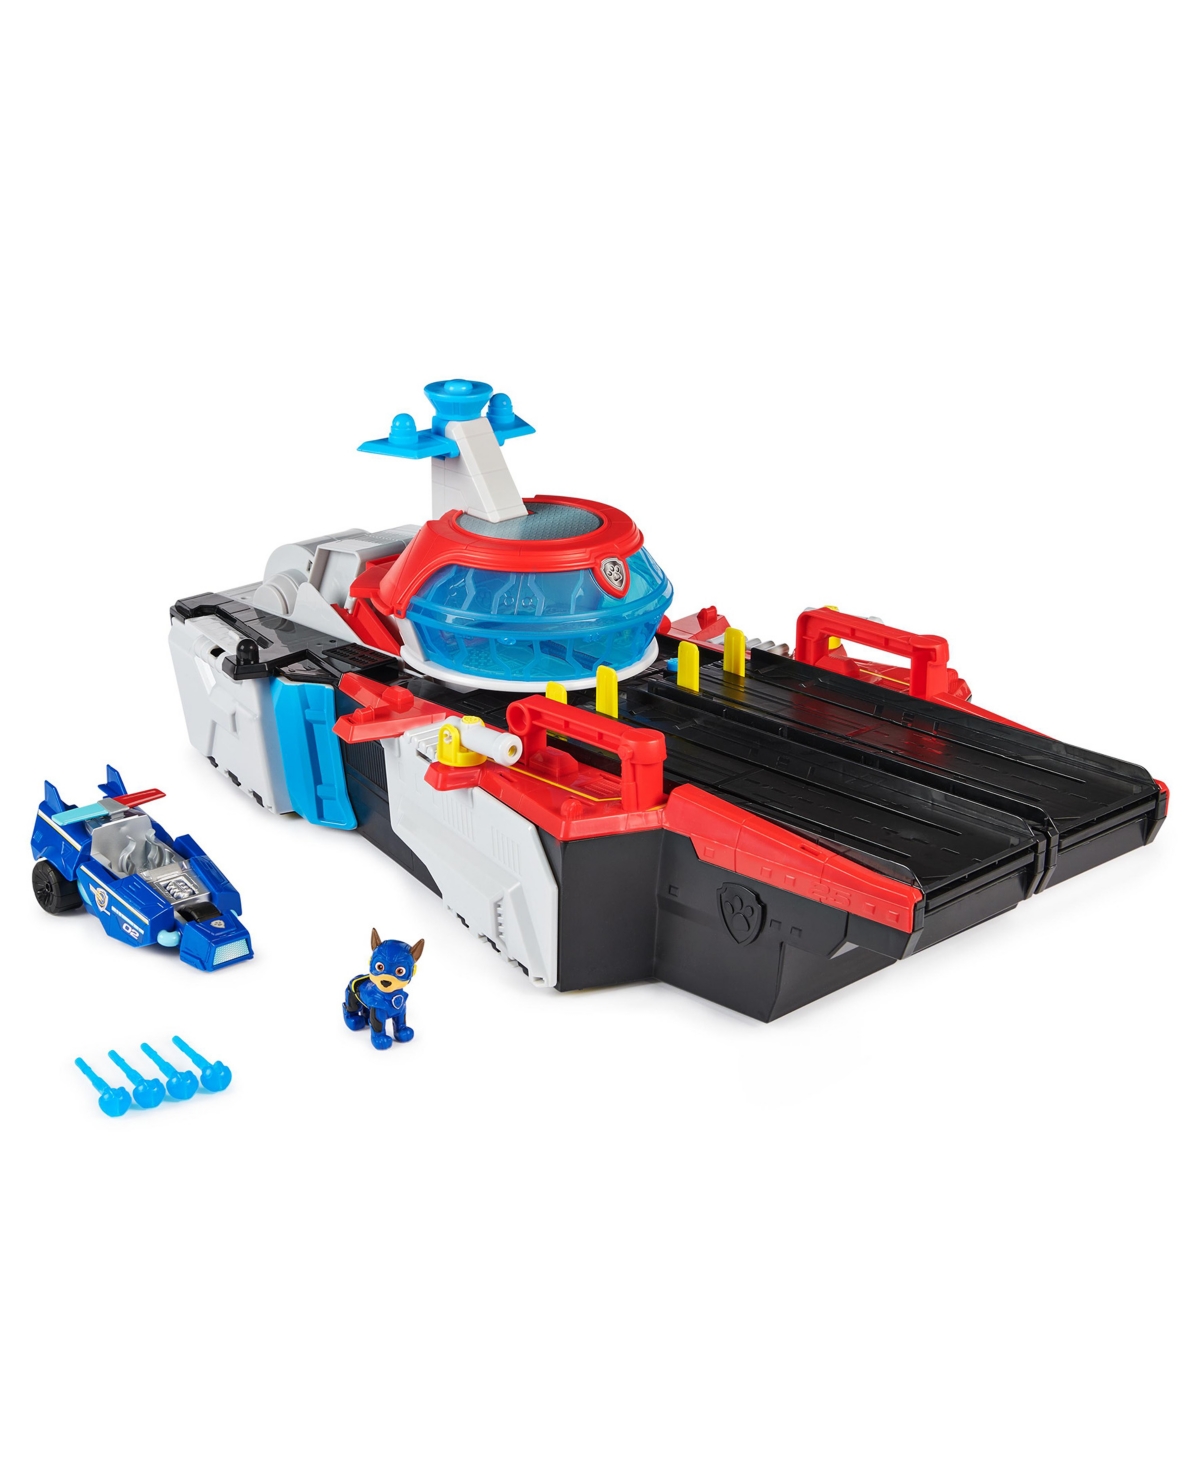 Paw Patrol - The Mighty Movie, Aircraft Carrier Hq, With Chase Action Figure And Mighty Pups Cruiser, Kids Toys In Multi